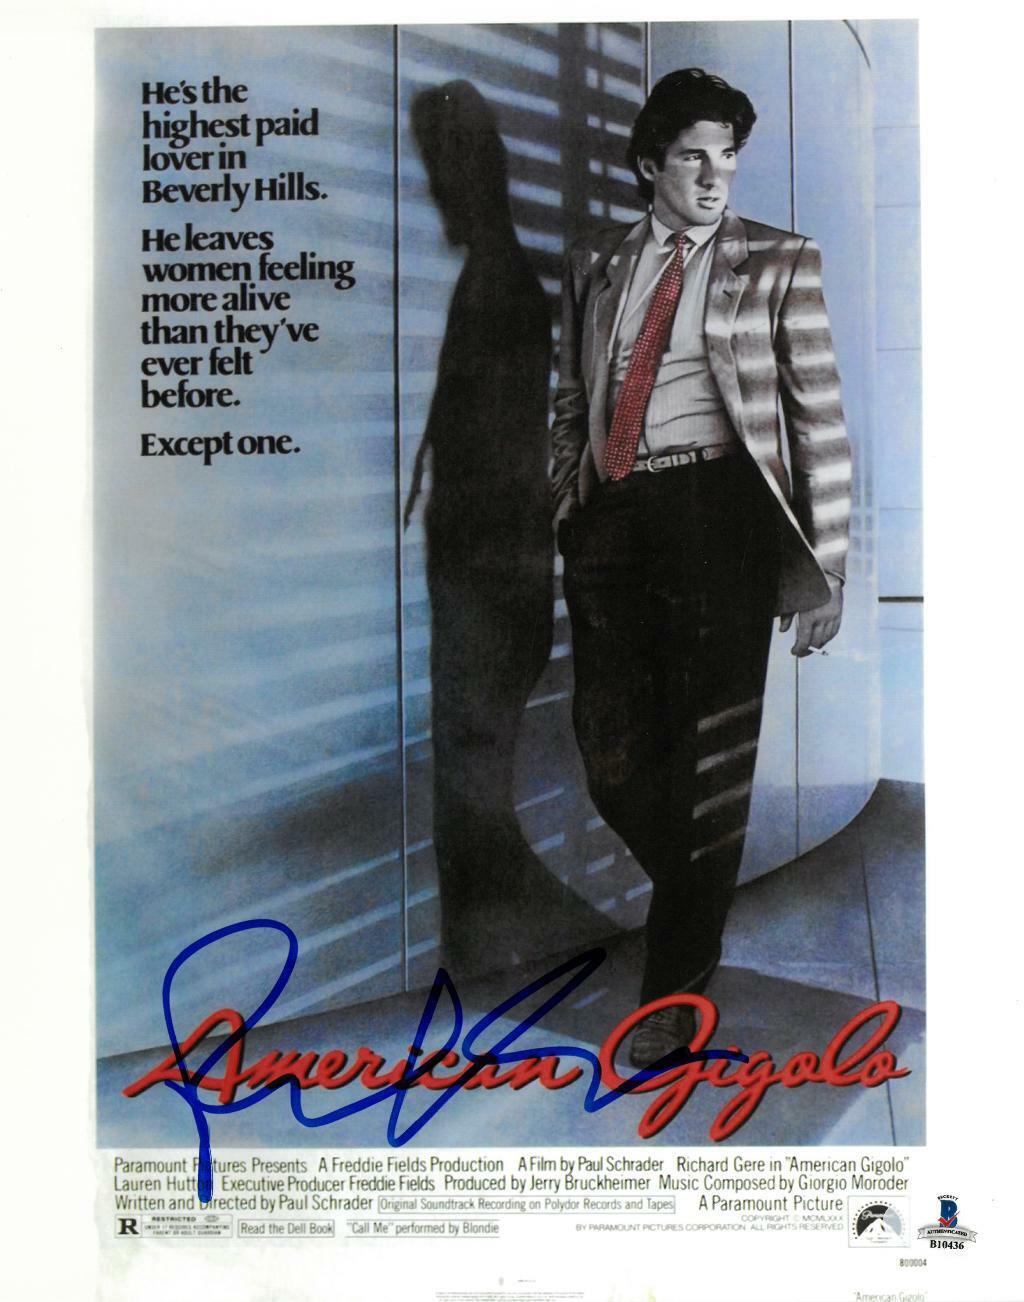 Paul Schrader Signed American Gigolo Autographed 8x10 Photo Poster painting BECKETT #B10436